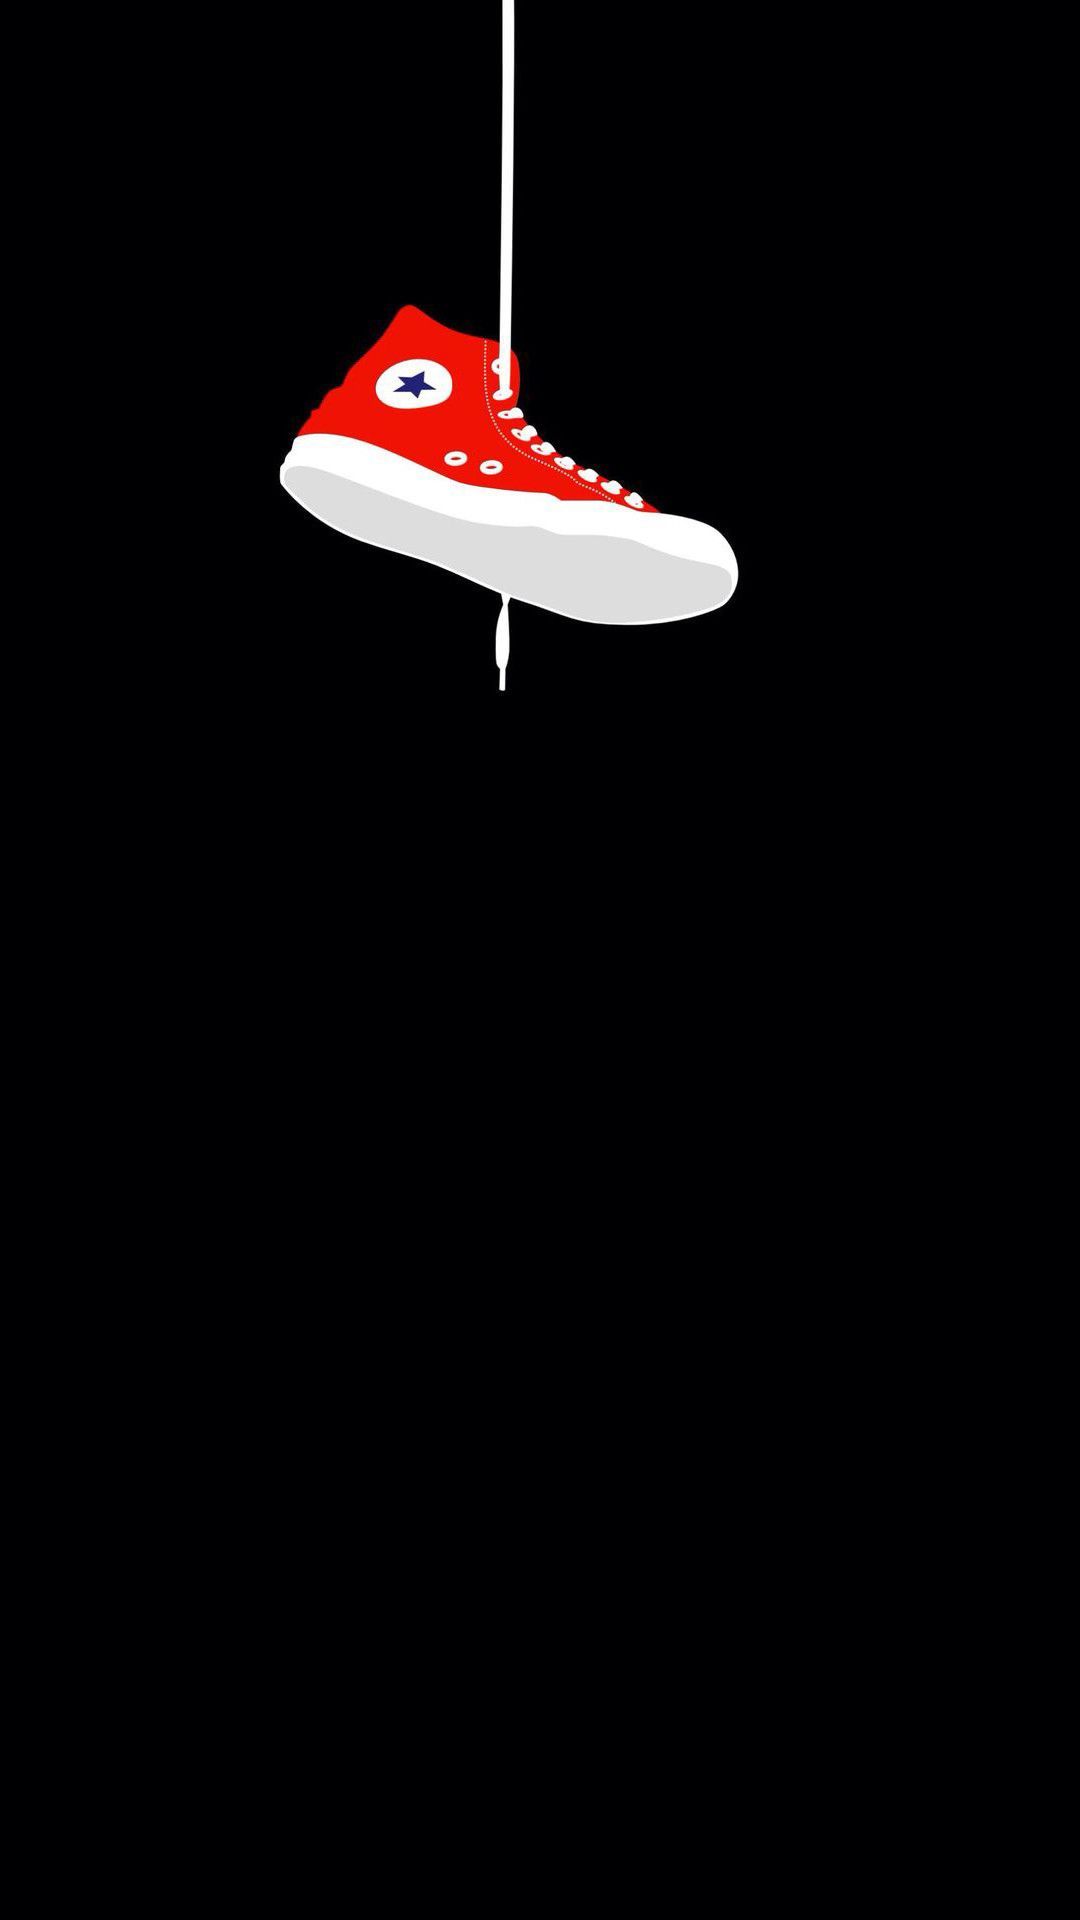 Converse Shoes Wallpaper Free Converse Shoes Background